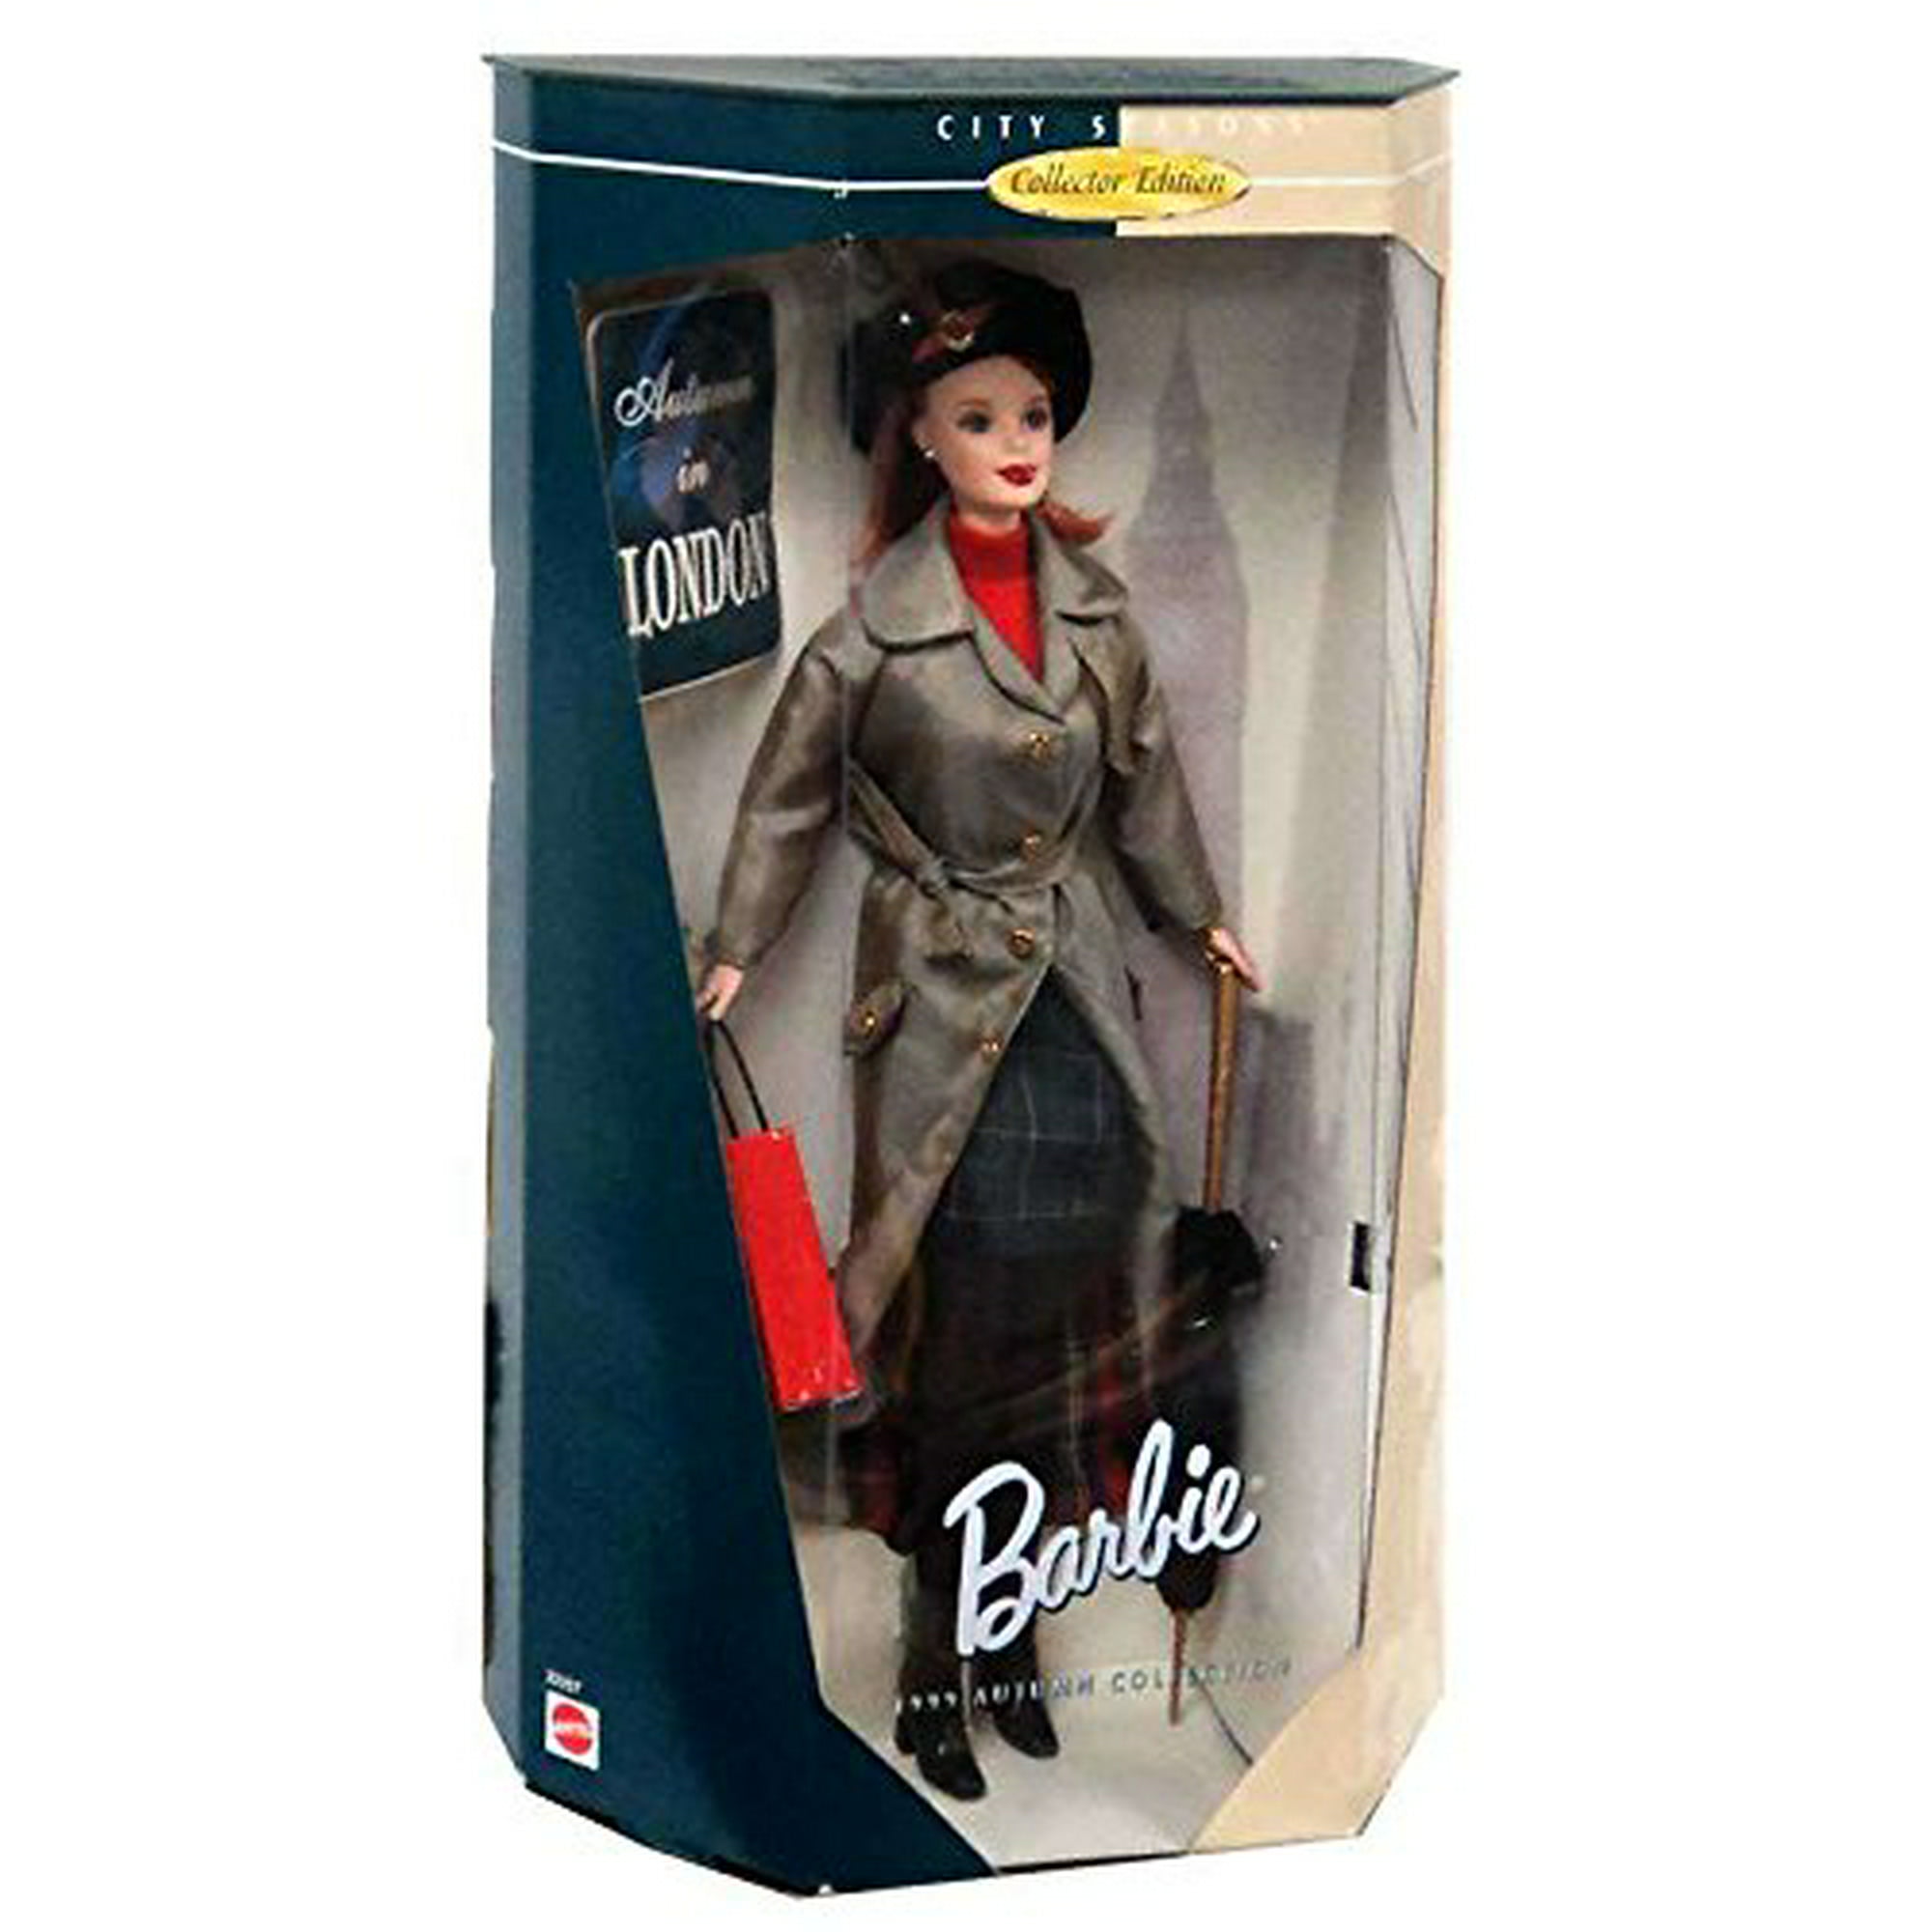 Barbie City Seasons Collector Edition Autumn in London -- 1999 